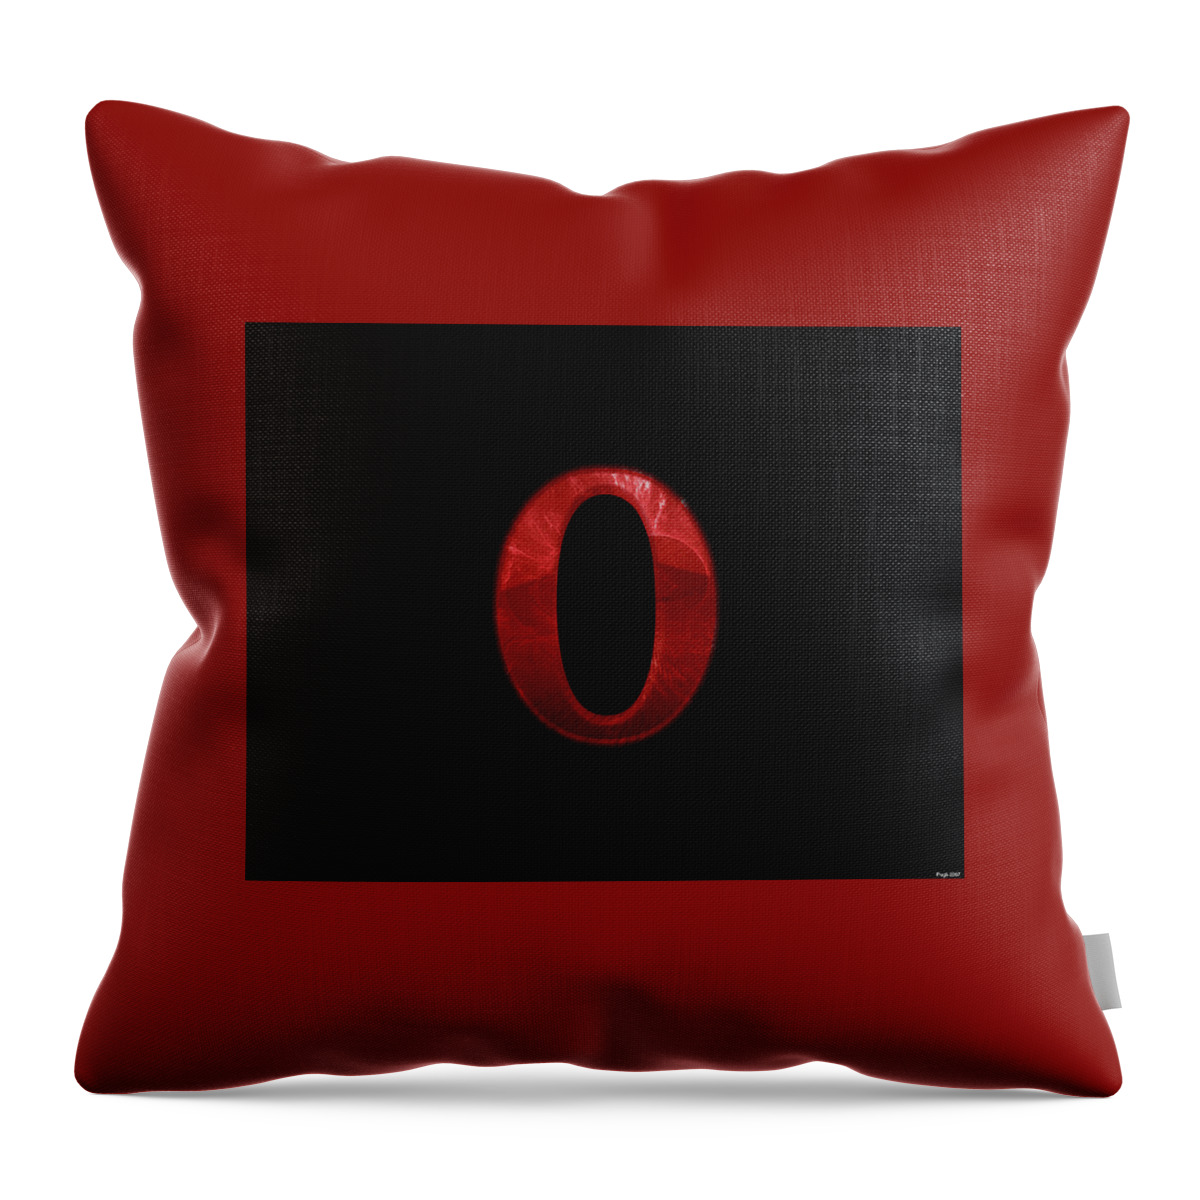 Opera Throw Pillow featuring the digital art Opera by Super Lovely